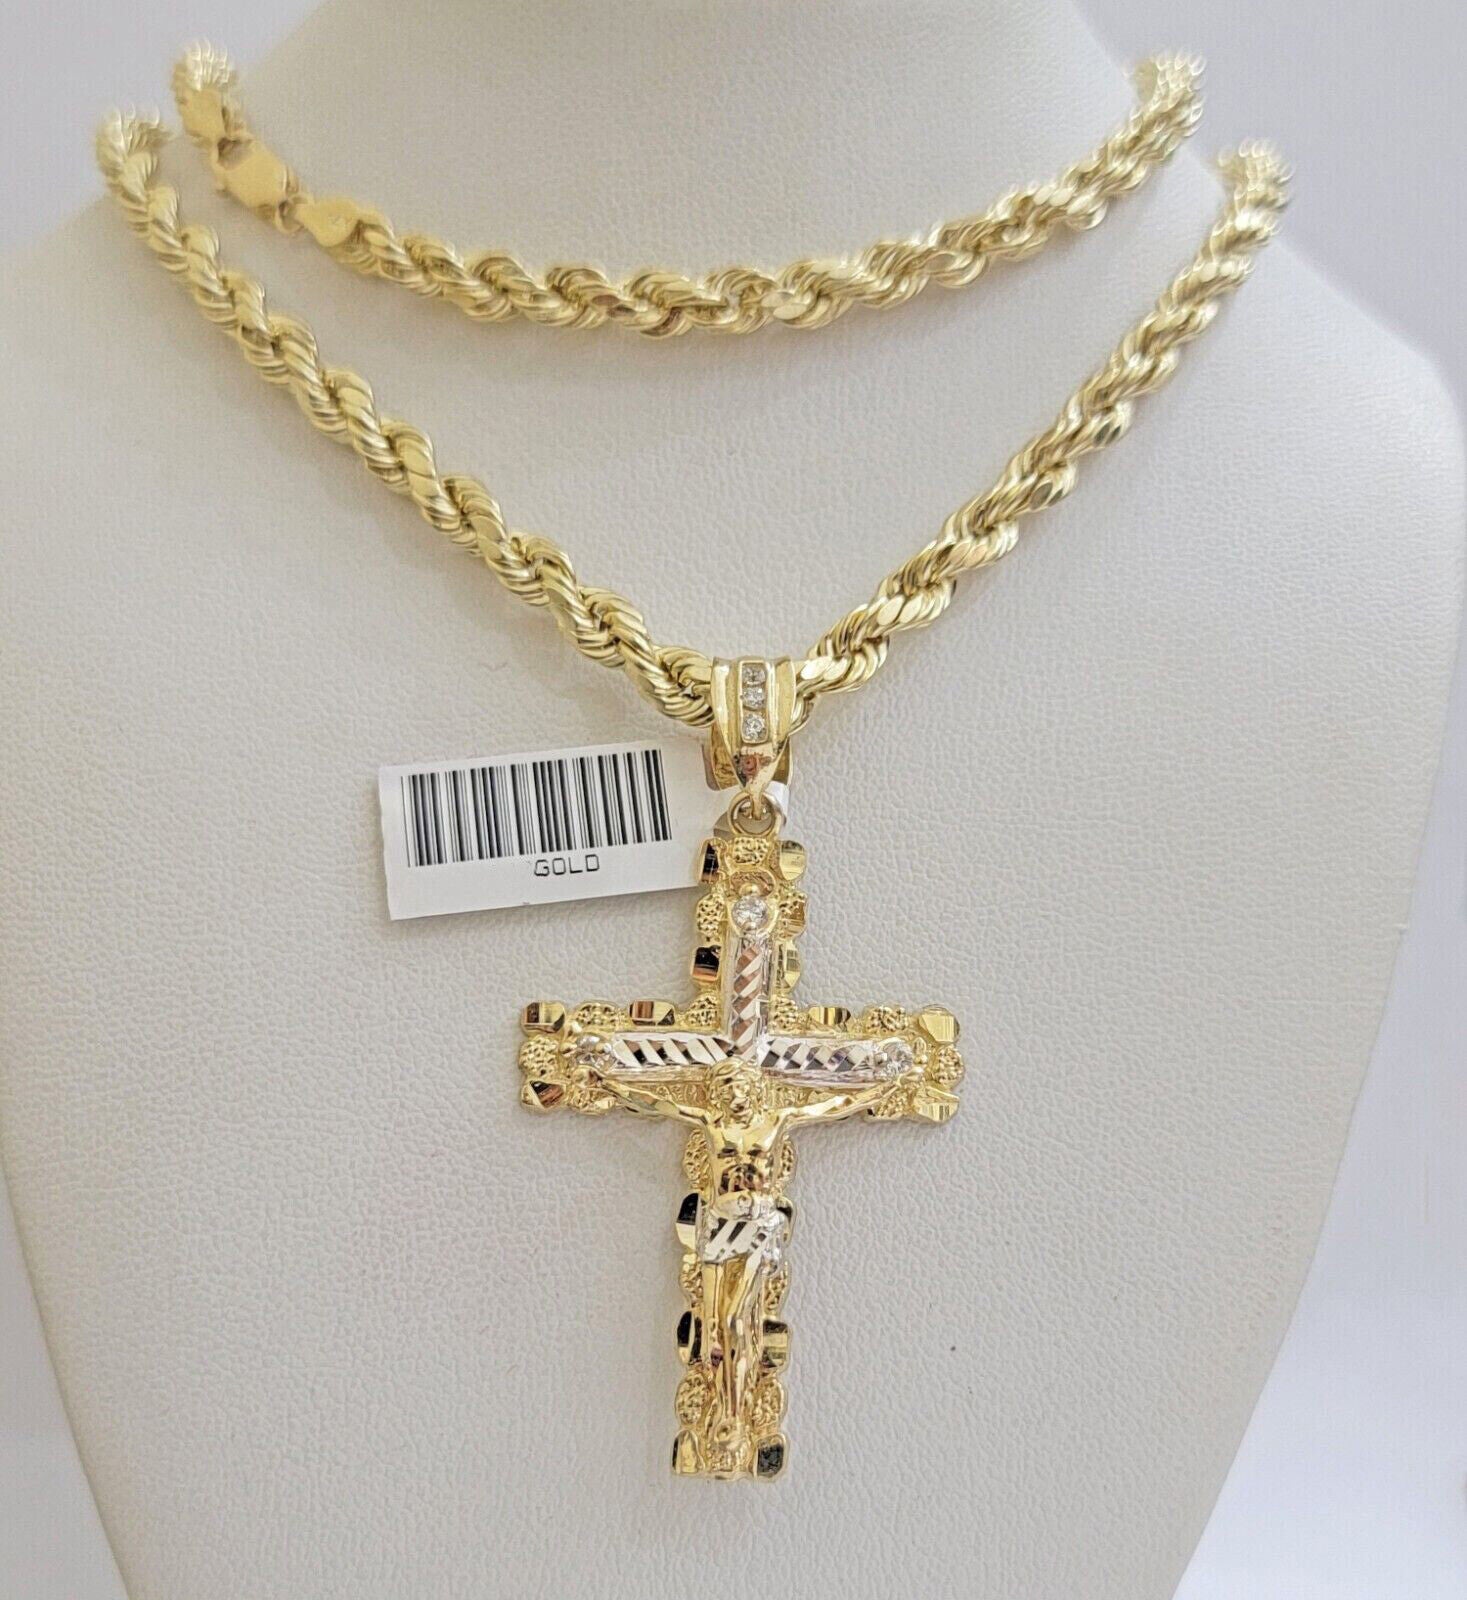 Real 10k Gold Rope Chain 22 inch Jesus Cross Charm Pendant Set 5mm Necklace Mens